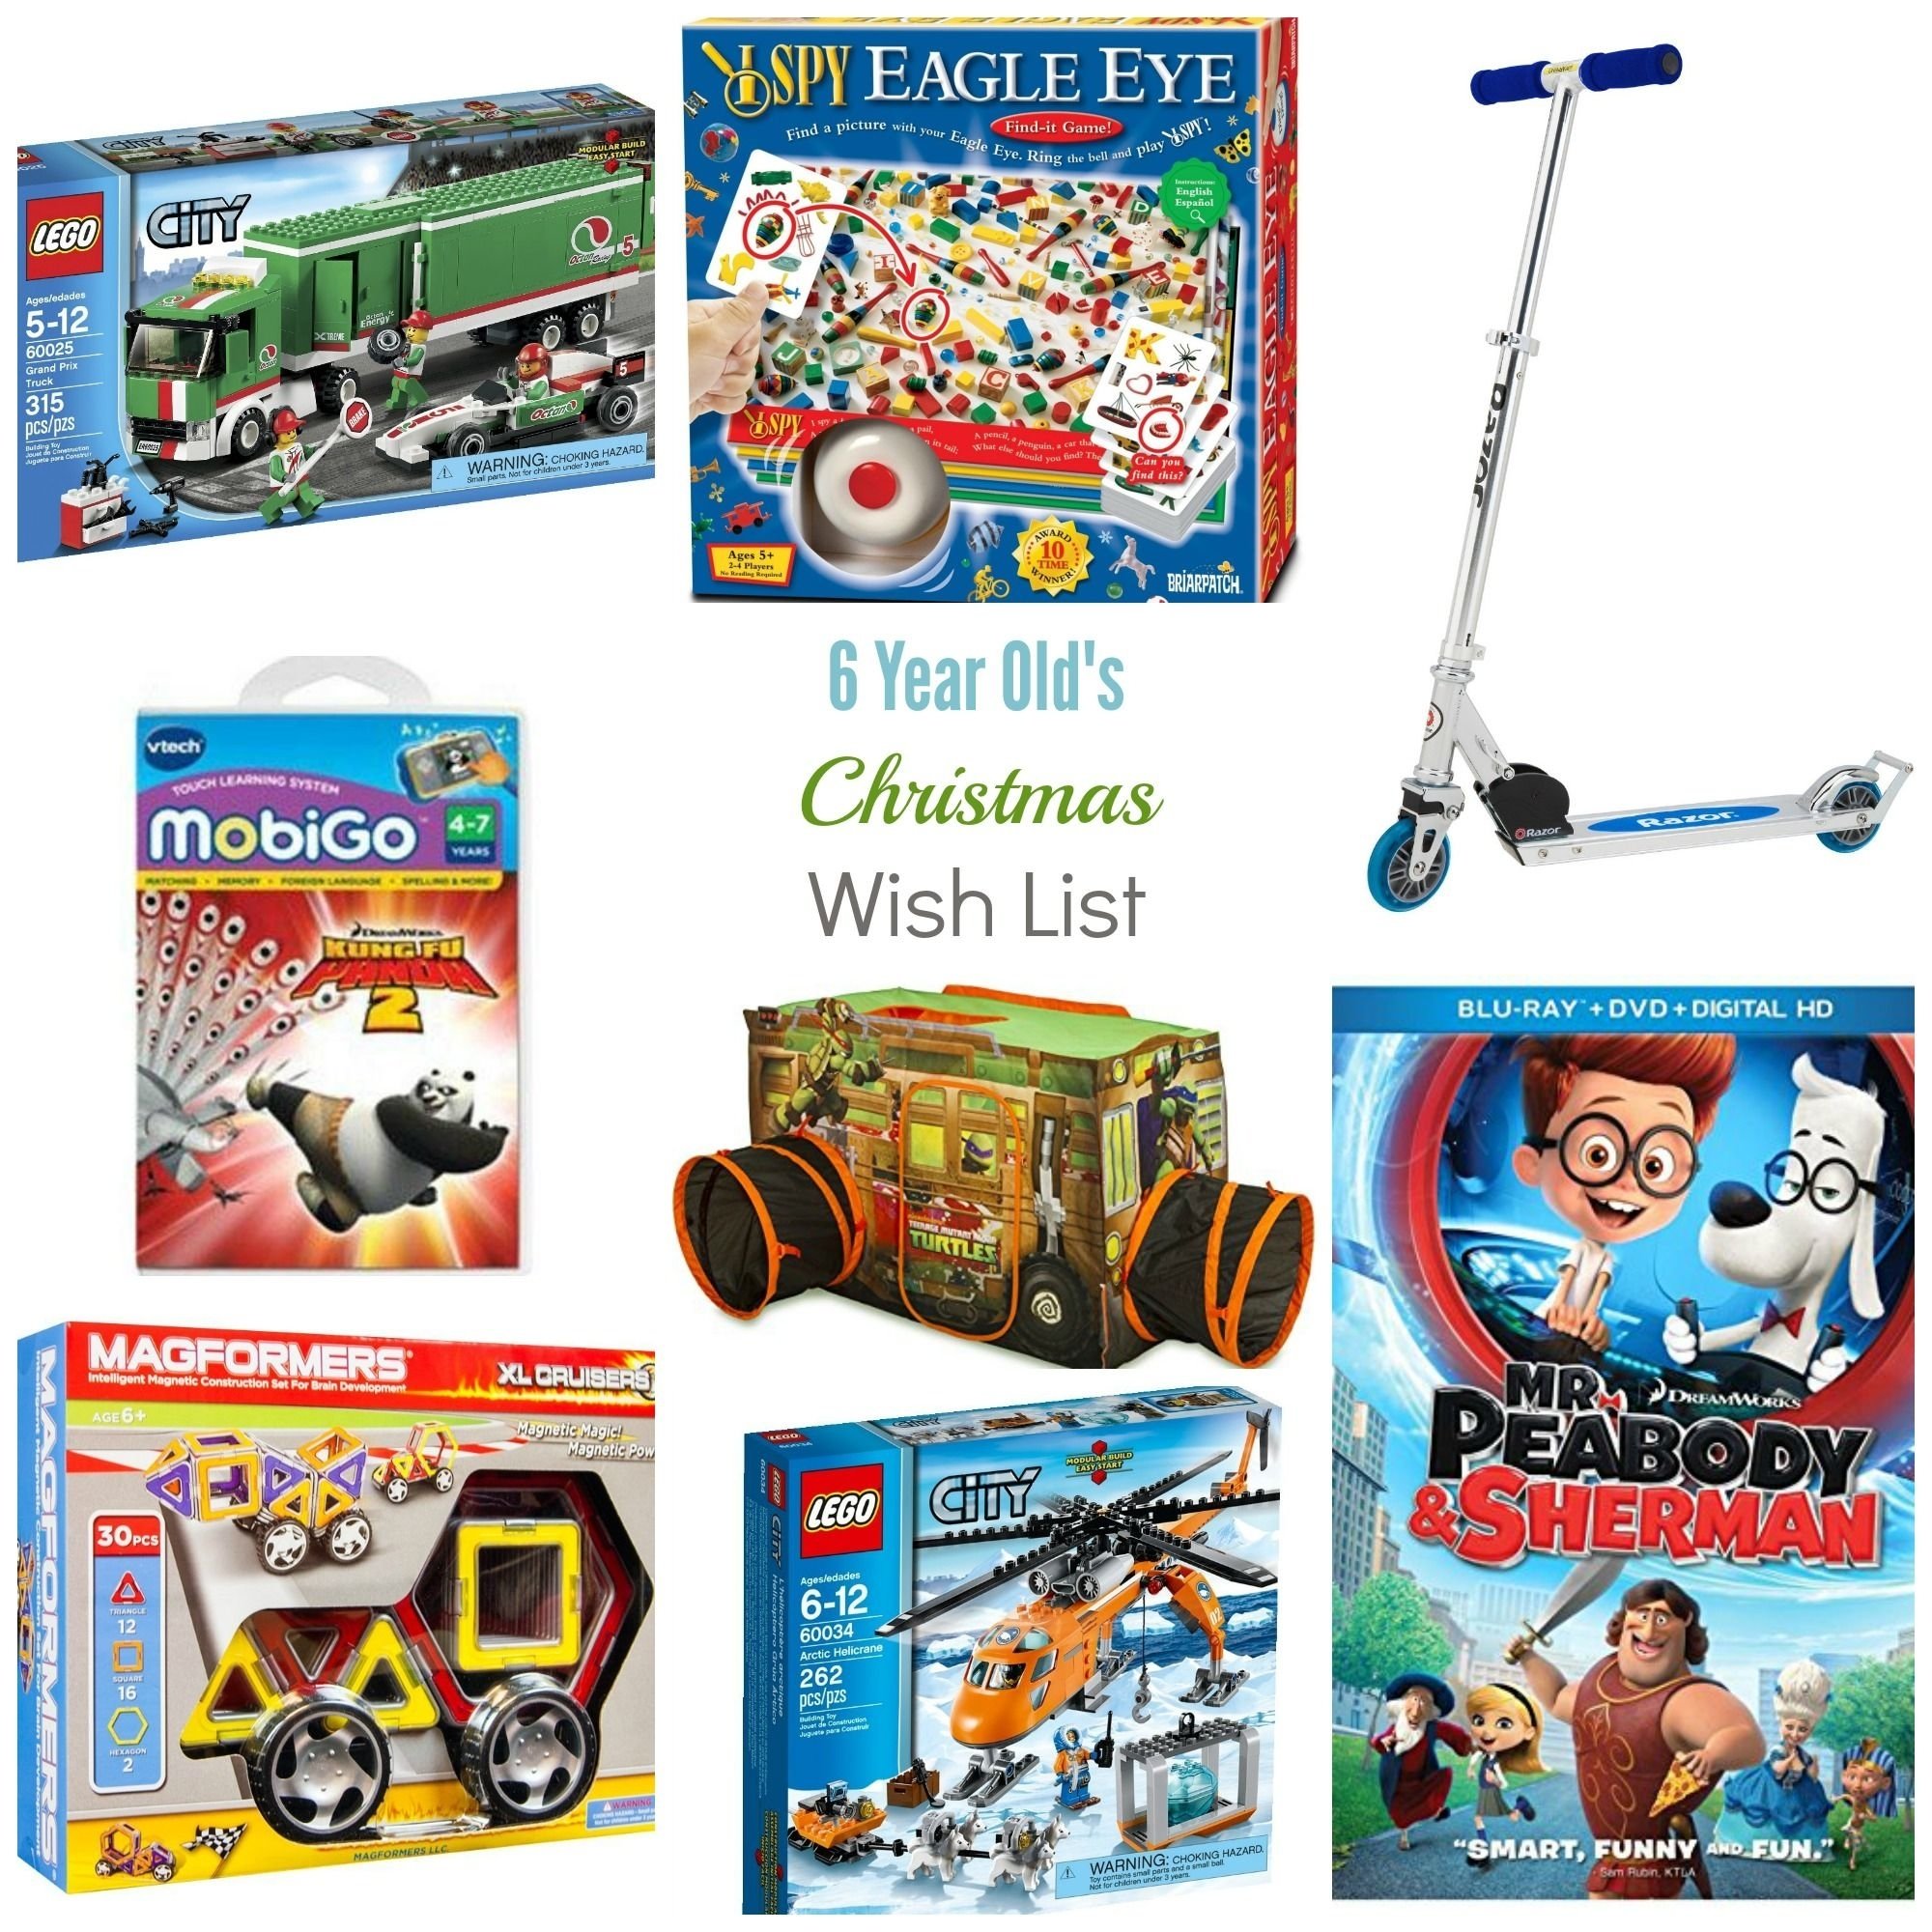 10 Most Popular Gift Ideas For Boys Age 12 christmas wish list 6 year old boy legos ninja turtles and gift 6 2022